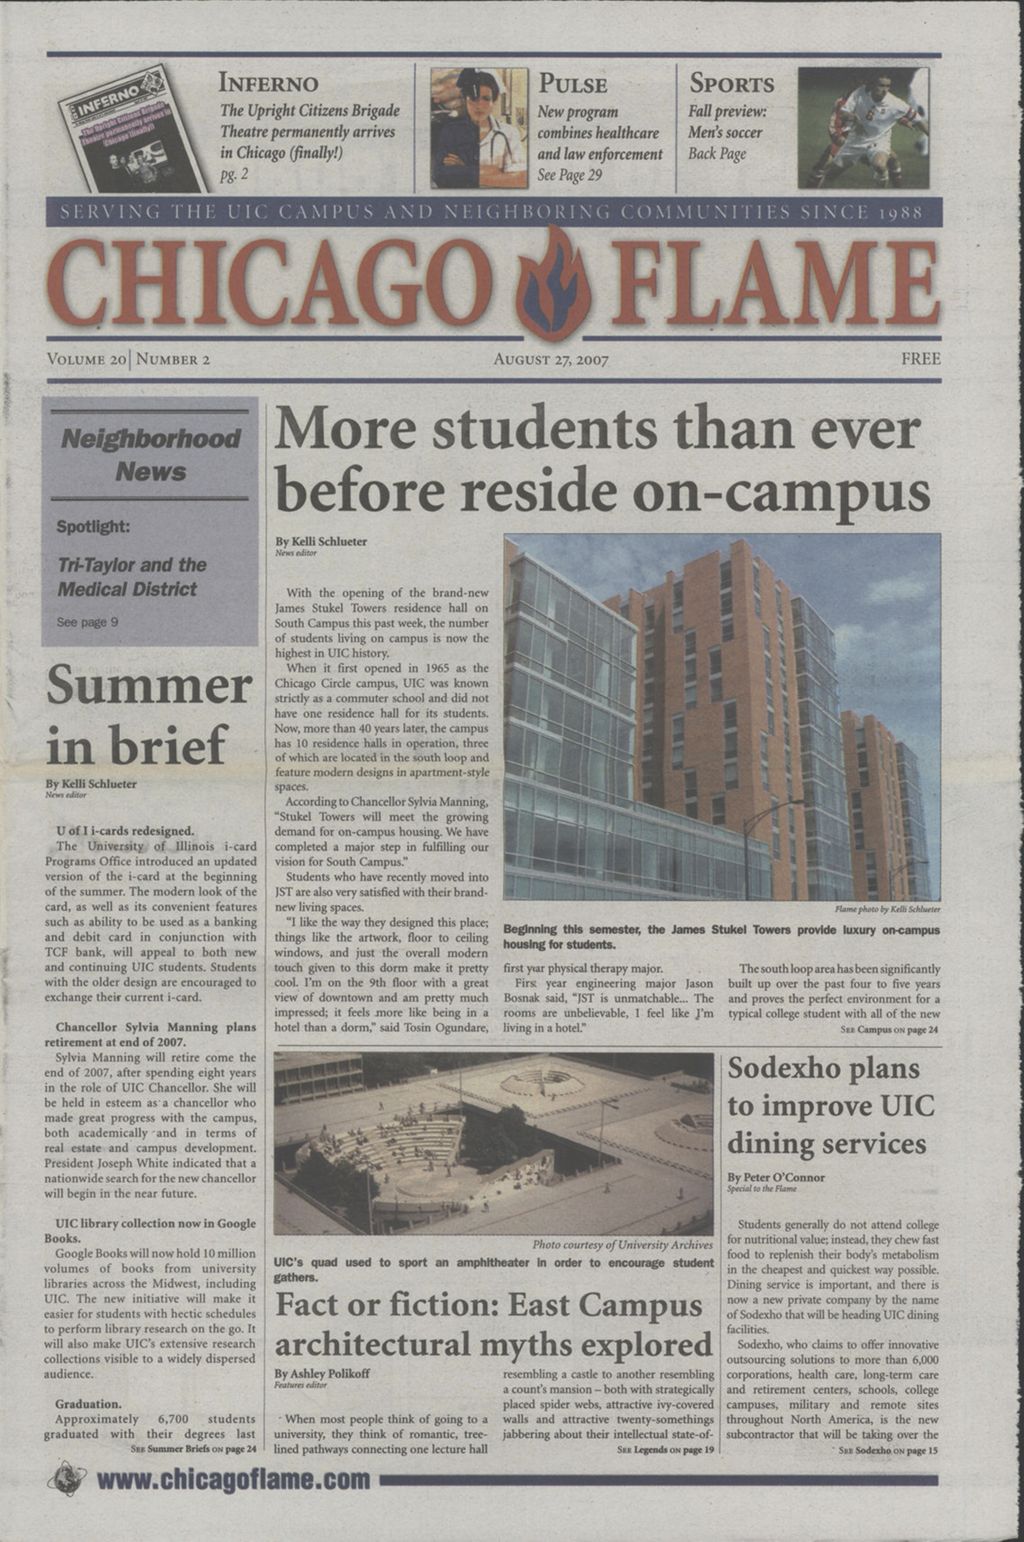 Chicago Flame (August 27, 2007)